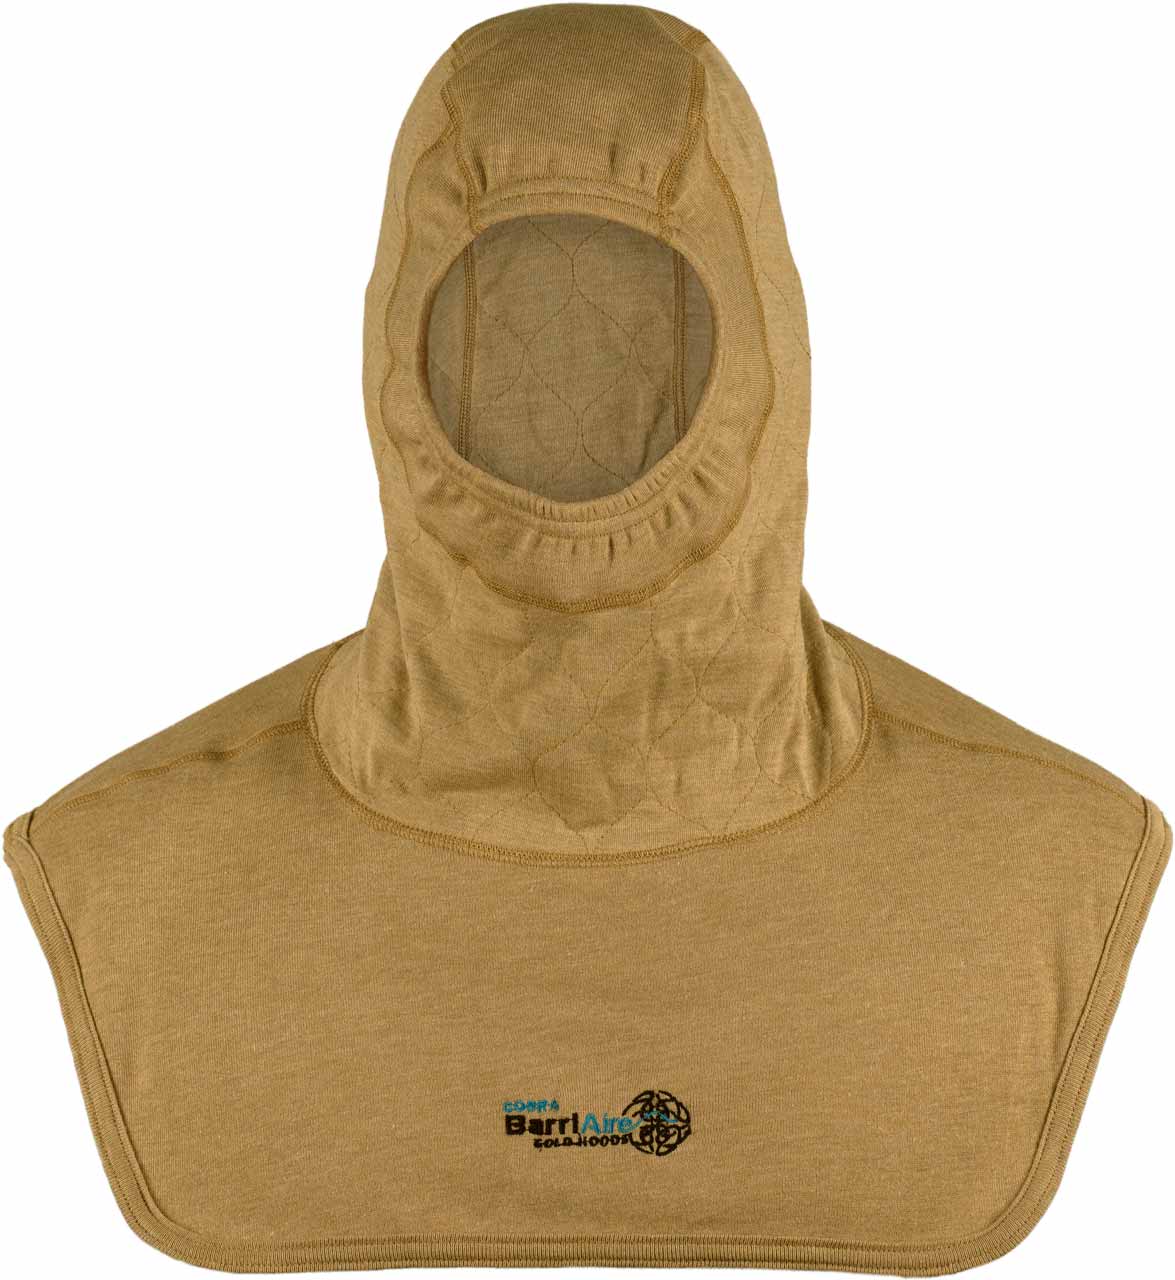 PGI BarriAire Gold Particulate Hood - Critical Coverage with Extended Bib and Rib Knit Face Opening 39701-00-194071 - Front